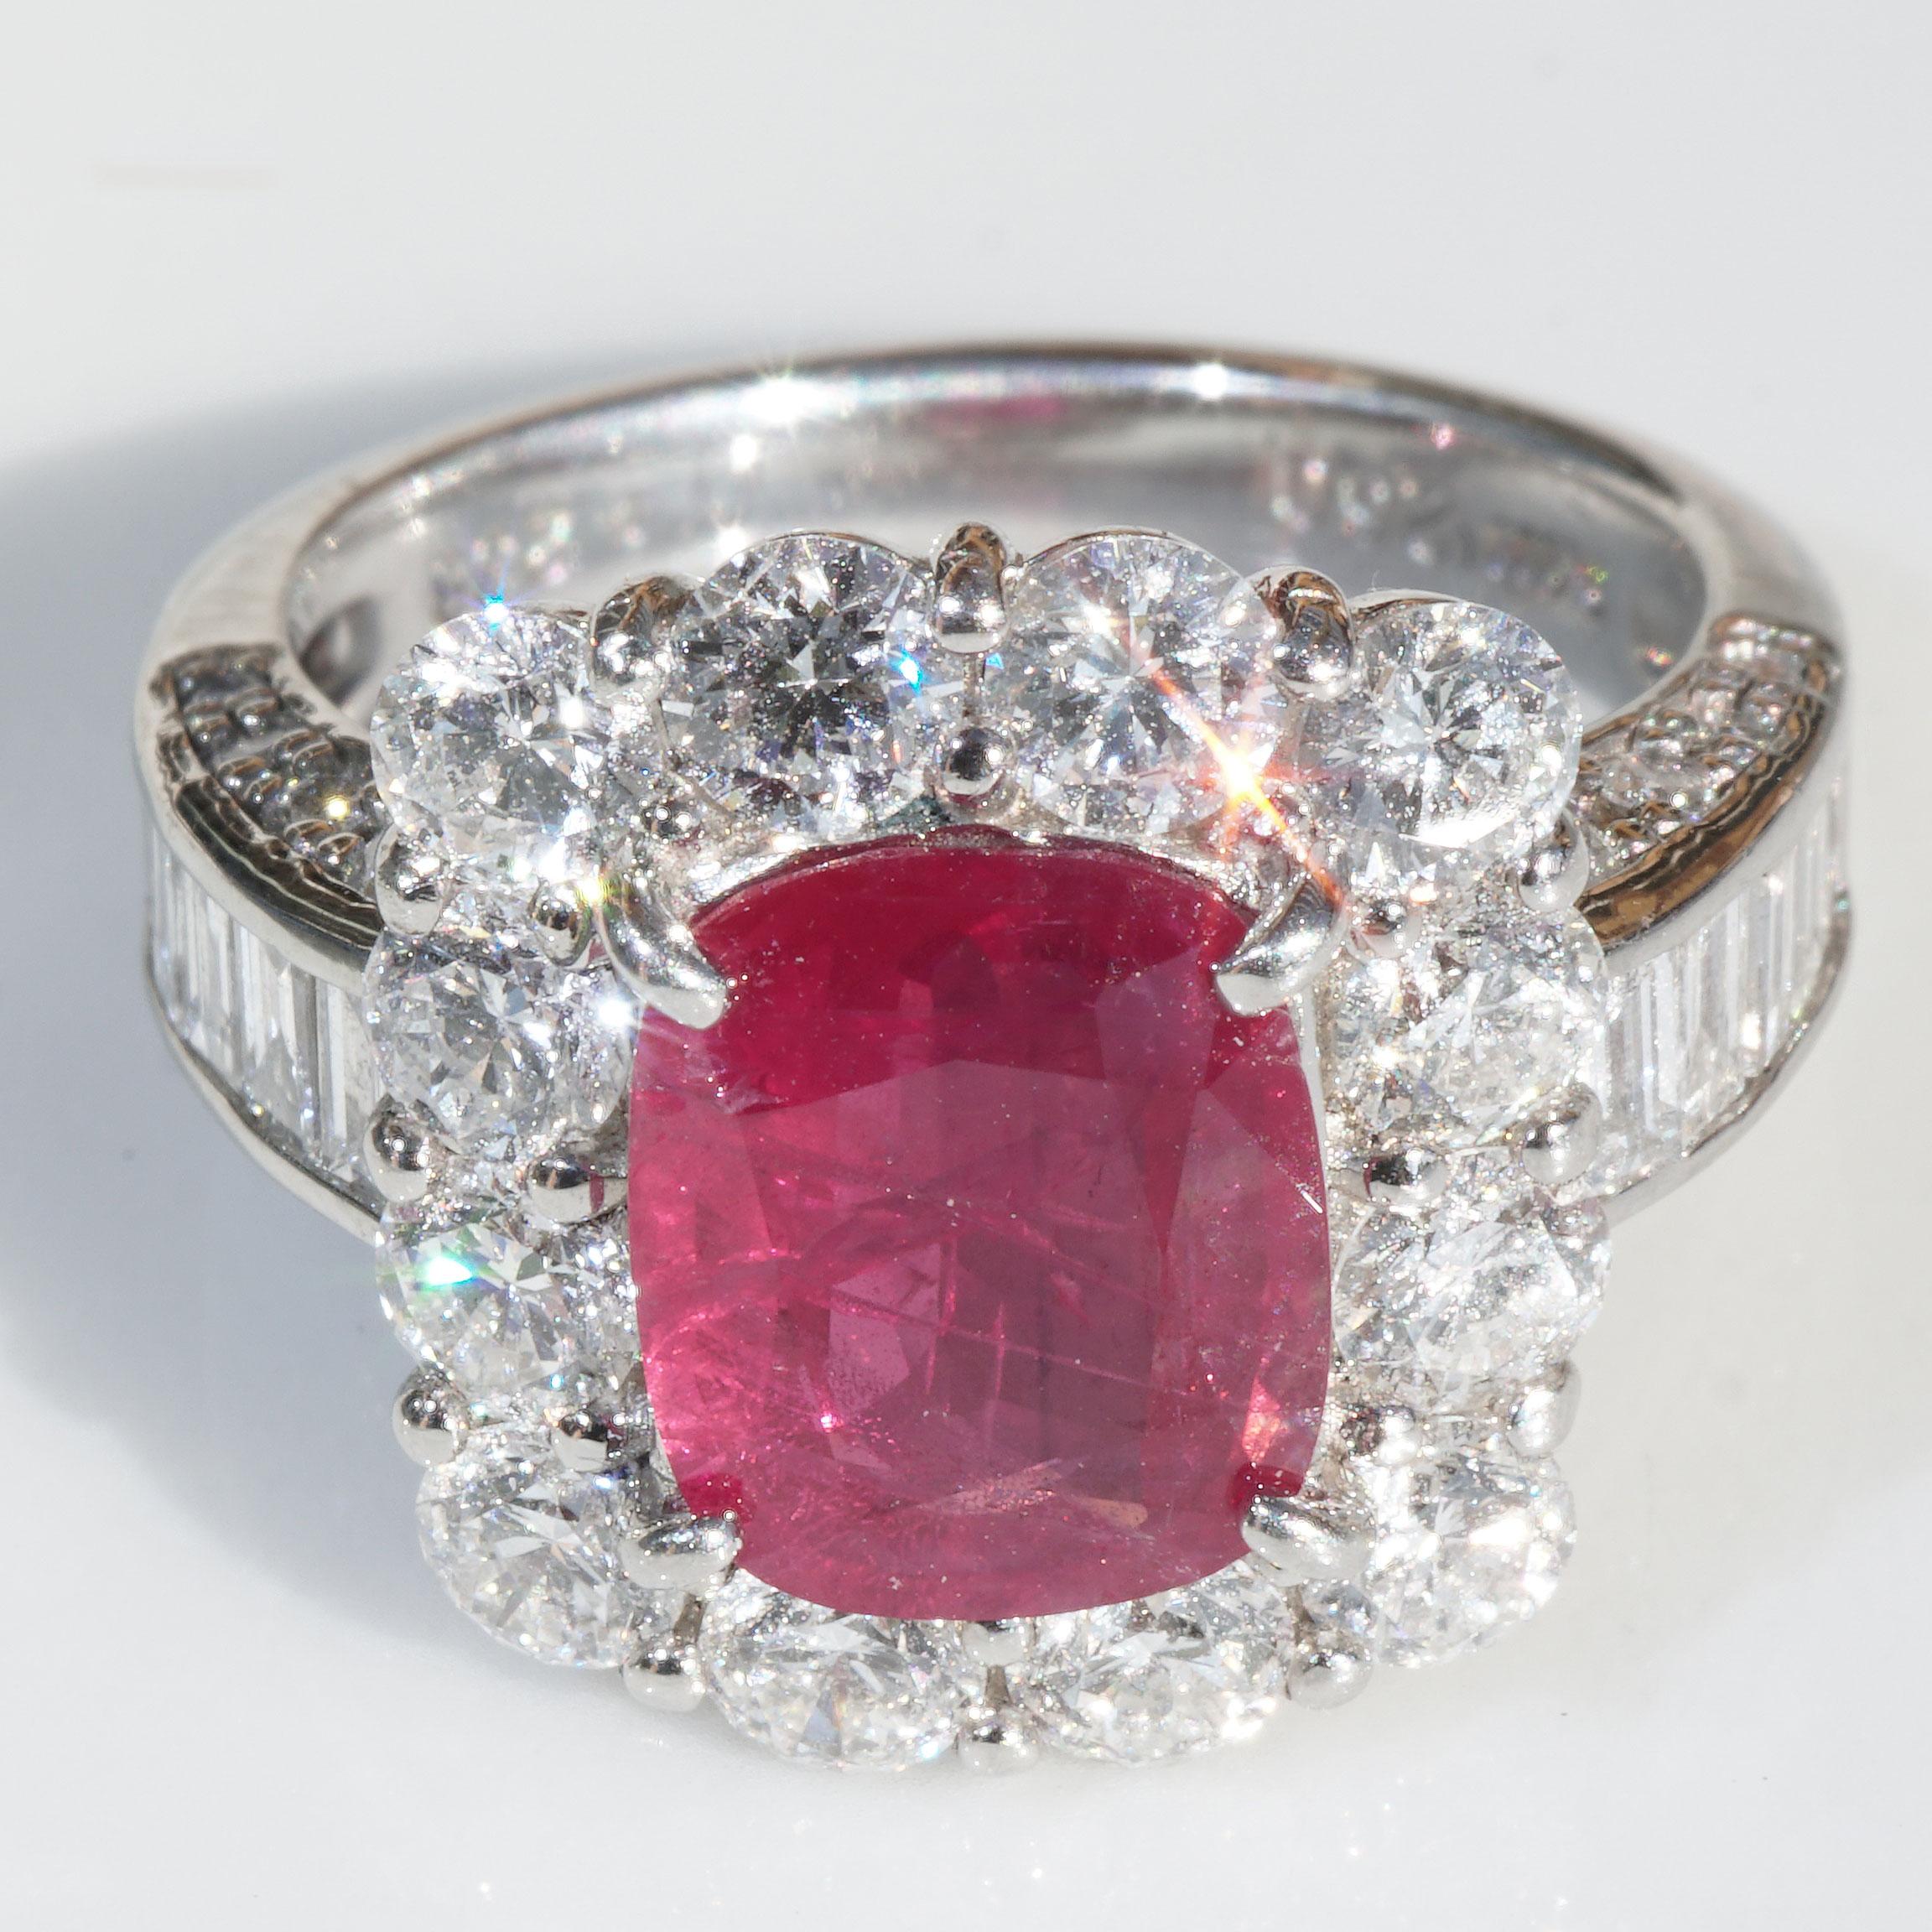 an investment ring of the super class...., an unheated Burma ruby from Myanmar, color red, in cushion shape, 9.32 x 7.71 x 3.51 mm, color distribution and brilliance very good, fine fan-like liquid inclusions (well visible in magnification), in the